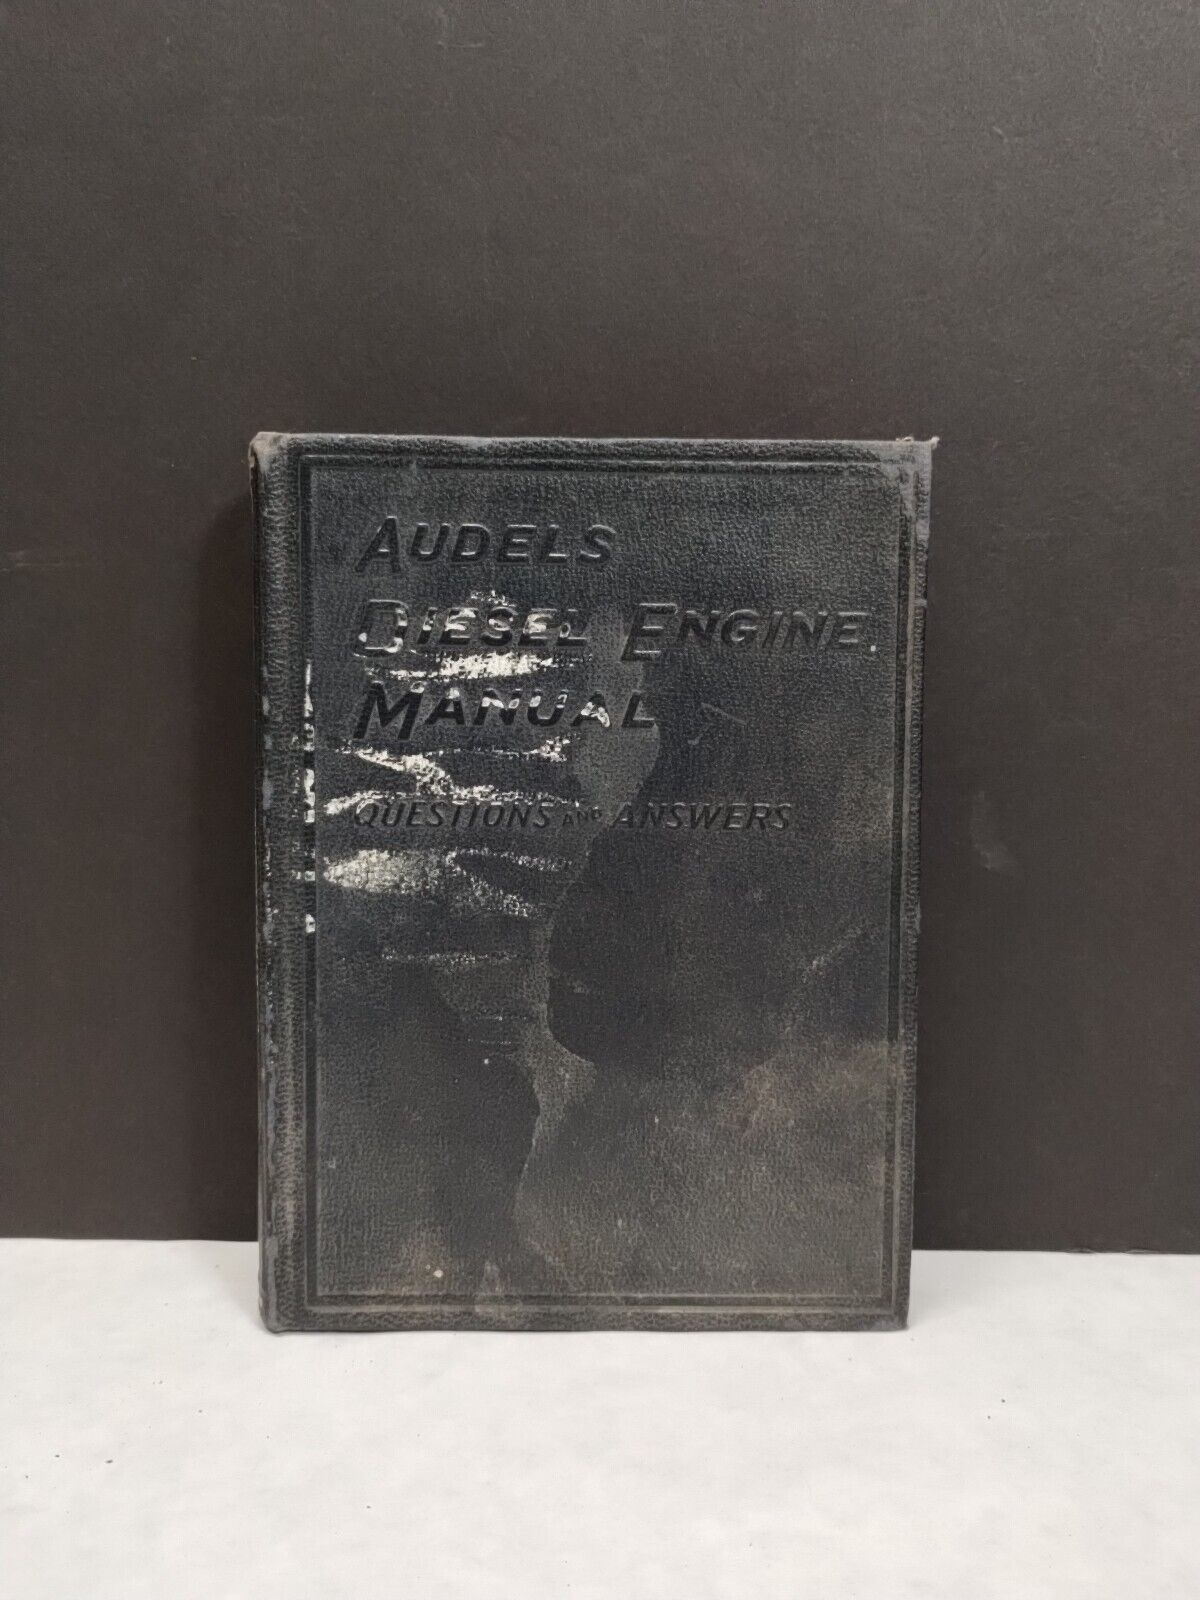 1942 Audels Diesel Engine Manual Questions and Answers - Illustrated